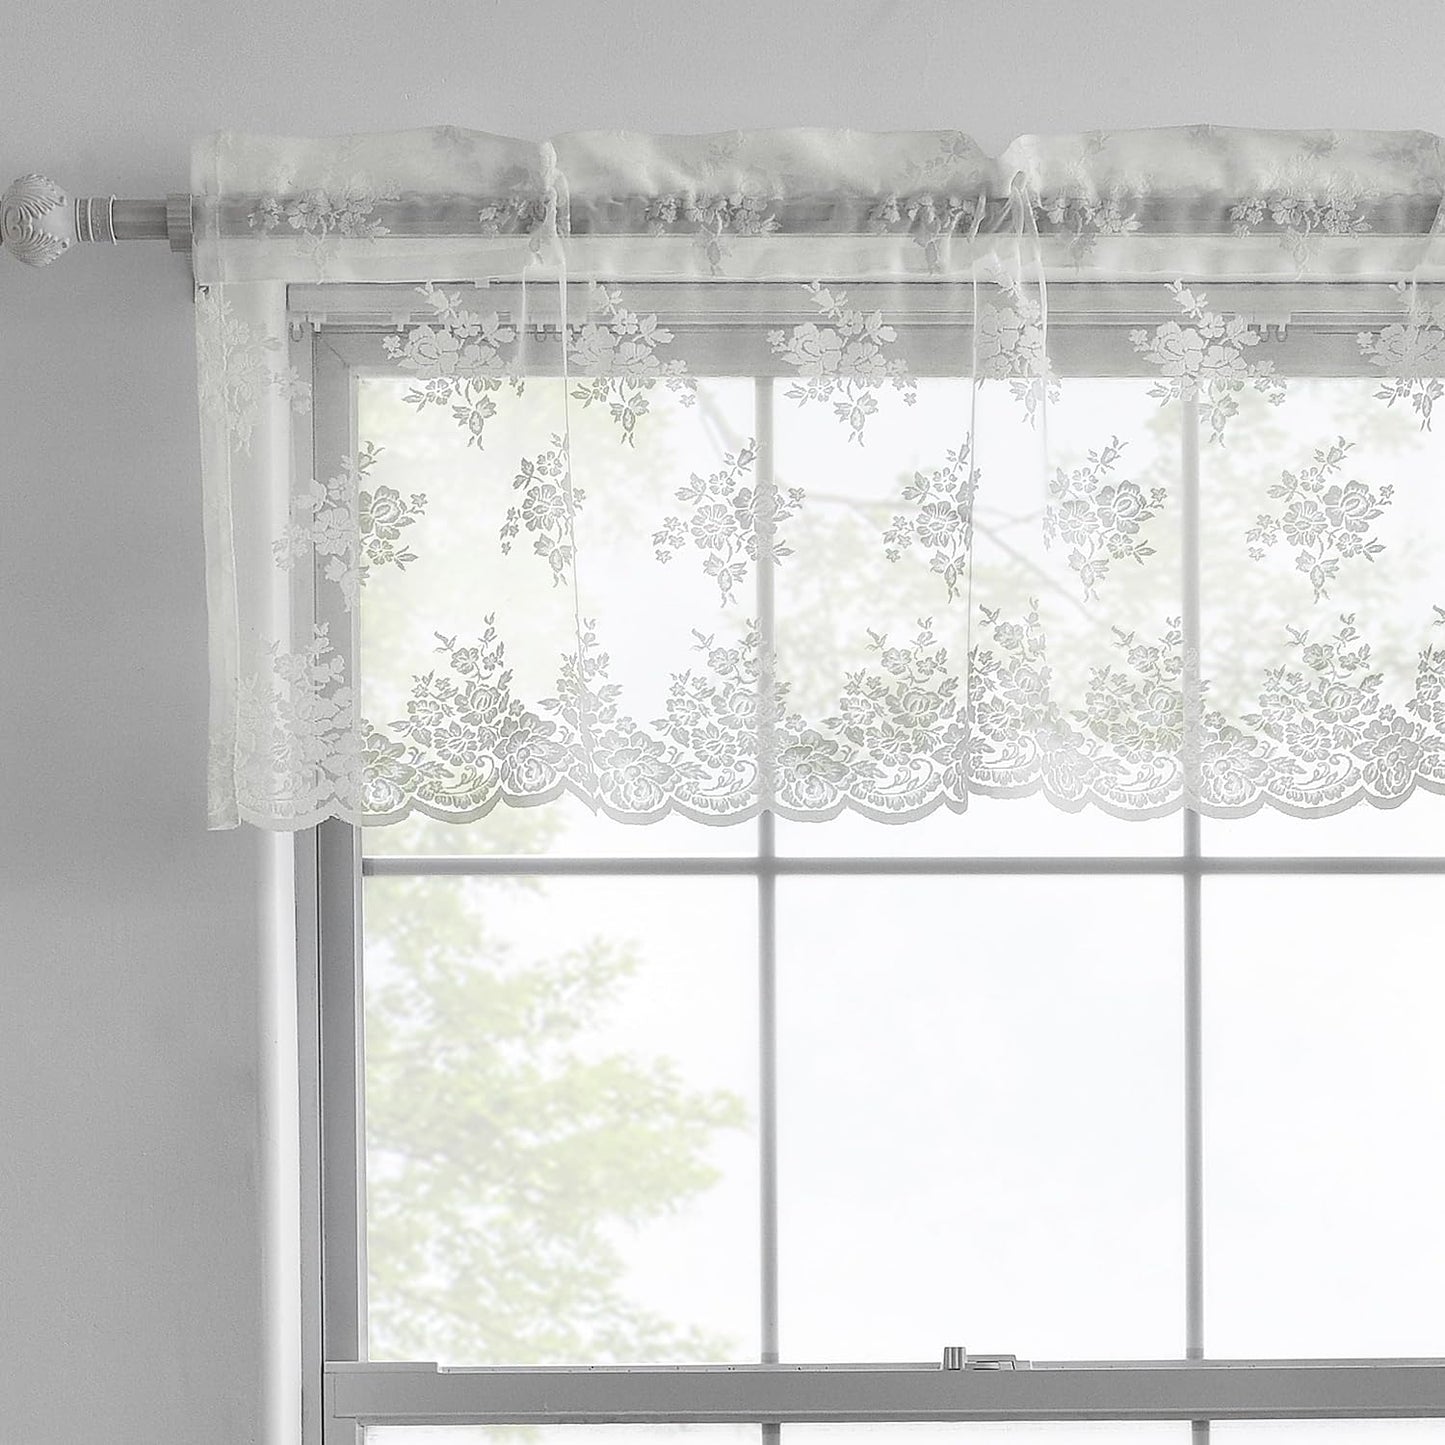 Kotile Sage Green Sheer Valance Curtain for Windows, Rustic Floral Spring Sheer Window Valance Curtain 18 Inch Length, Light Filtering Rod Pocket Lace Valance, 52 X 18 Inch, 1 Panel, Sage Green  Kotile Textile Ivory 52 In X 18 In (W X L) 